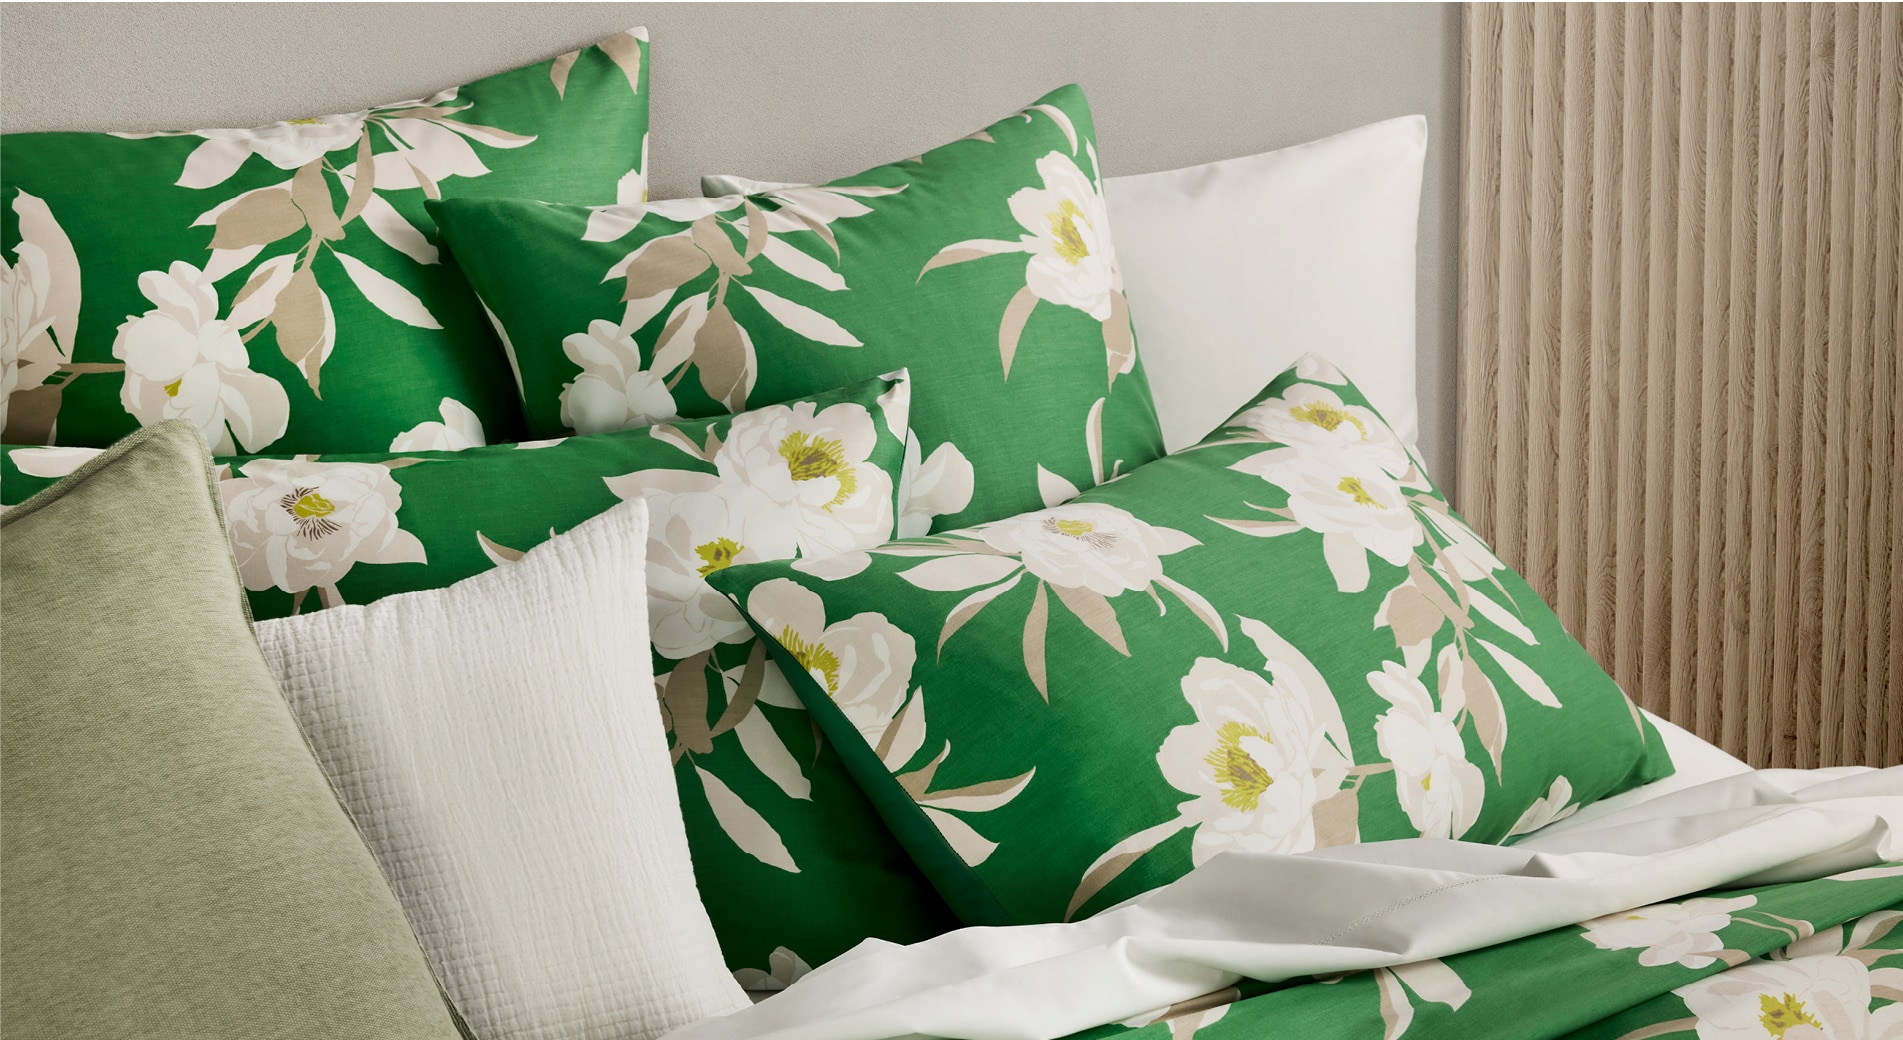 landscape photo of a styled bed, at the head. A glimpse of the quilt and flat sheet is seen, but it is mainly stacked pillows dressed in a lively green with cream oversized peony pattern. two white pillows can be seen peeking throughout.